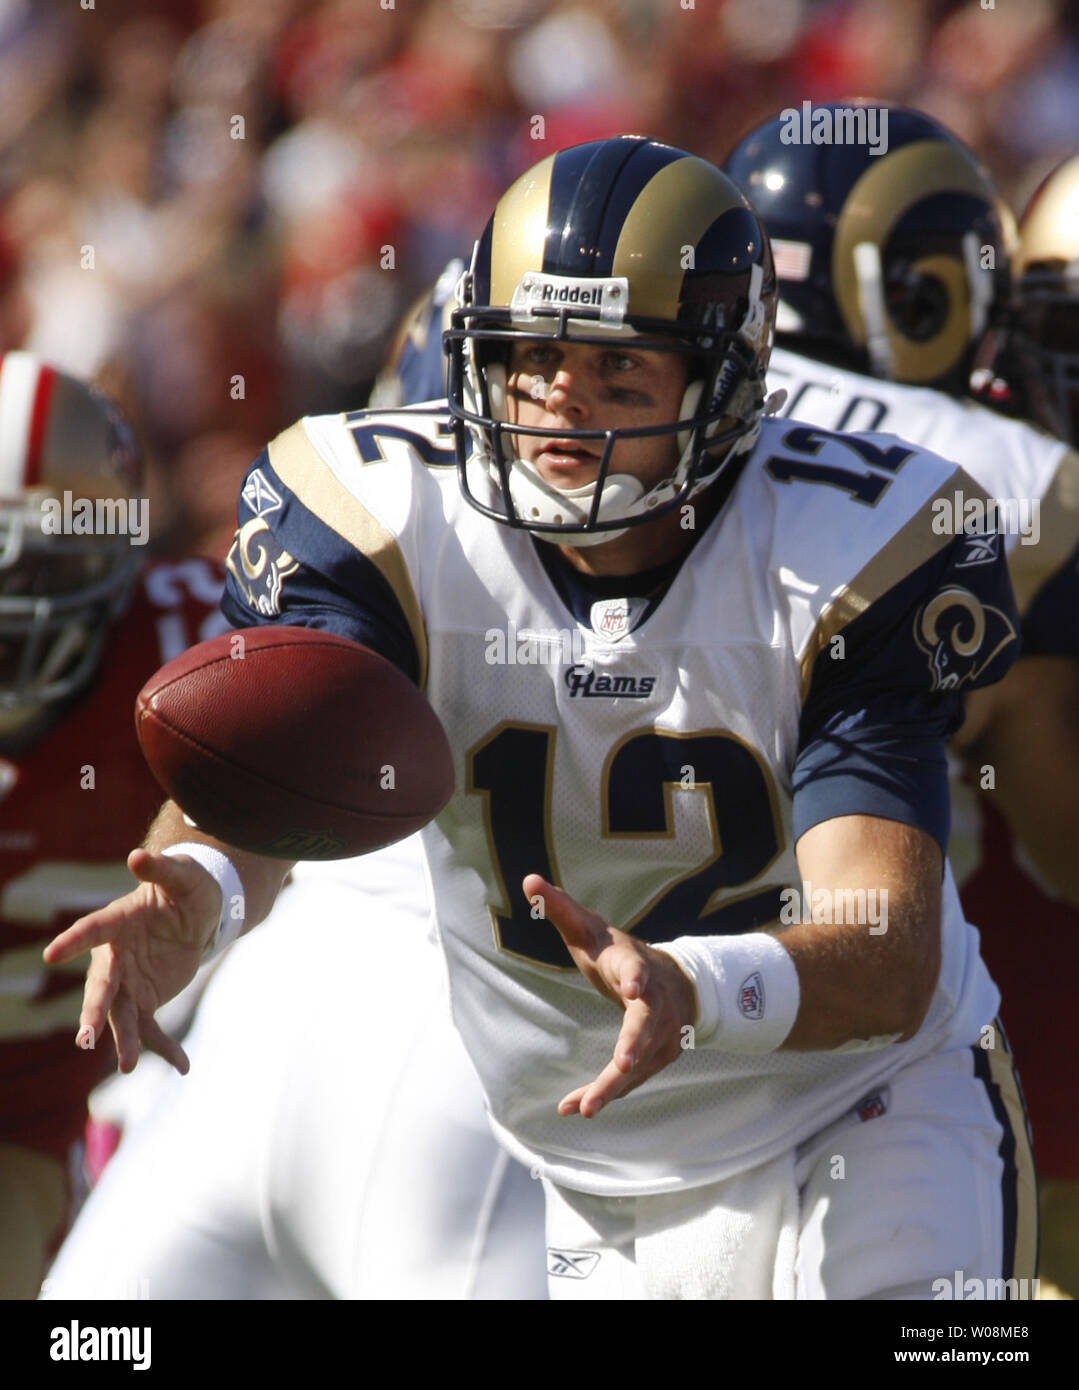 St. Louis Rams QB Kyle Boller (12) pitches the ball to a running back in play against the San Francisco 49ers at Candlestick Park in San Francisco on October 4, 2009. The 49ers defeated the Rams 35-0.    UPI/Terry Schmitt Stock Photo